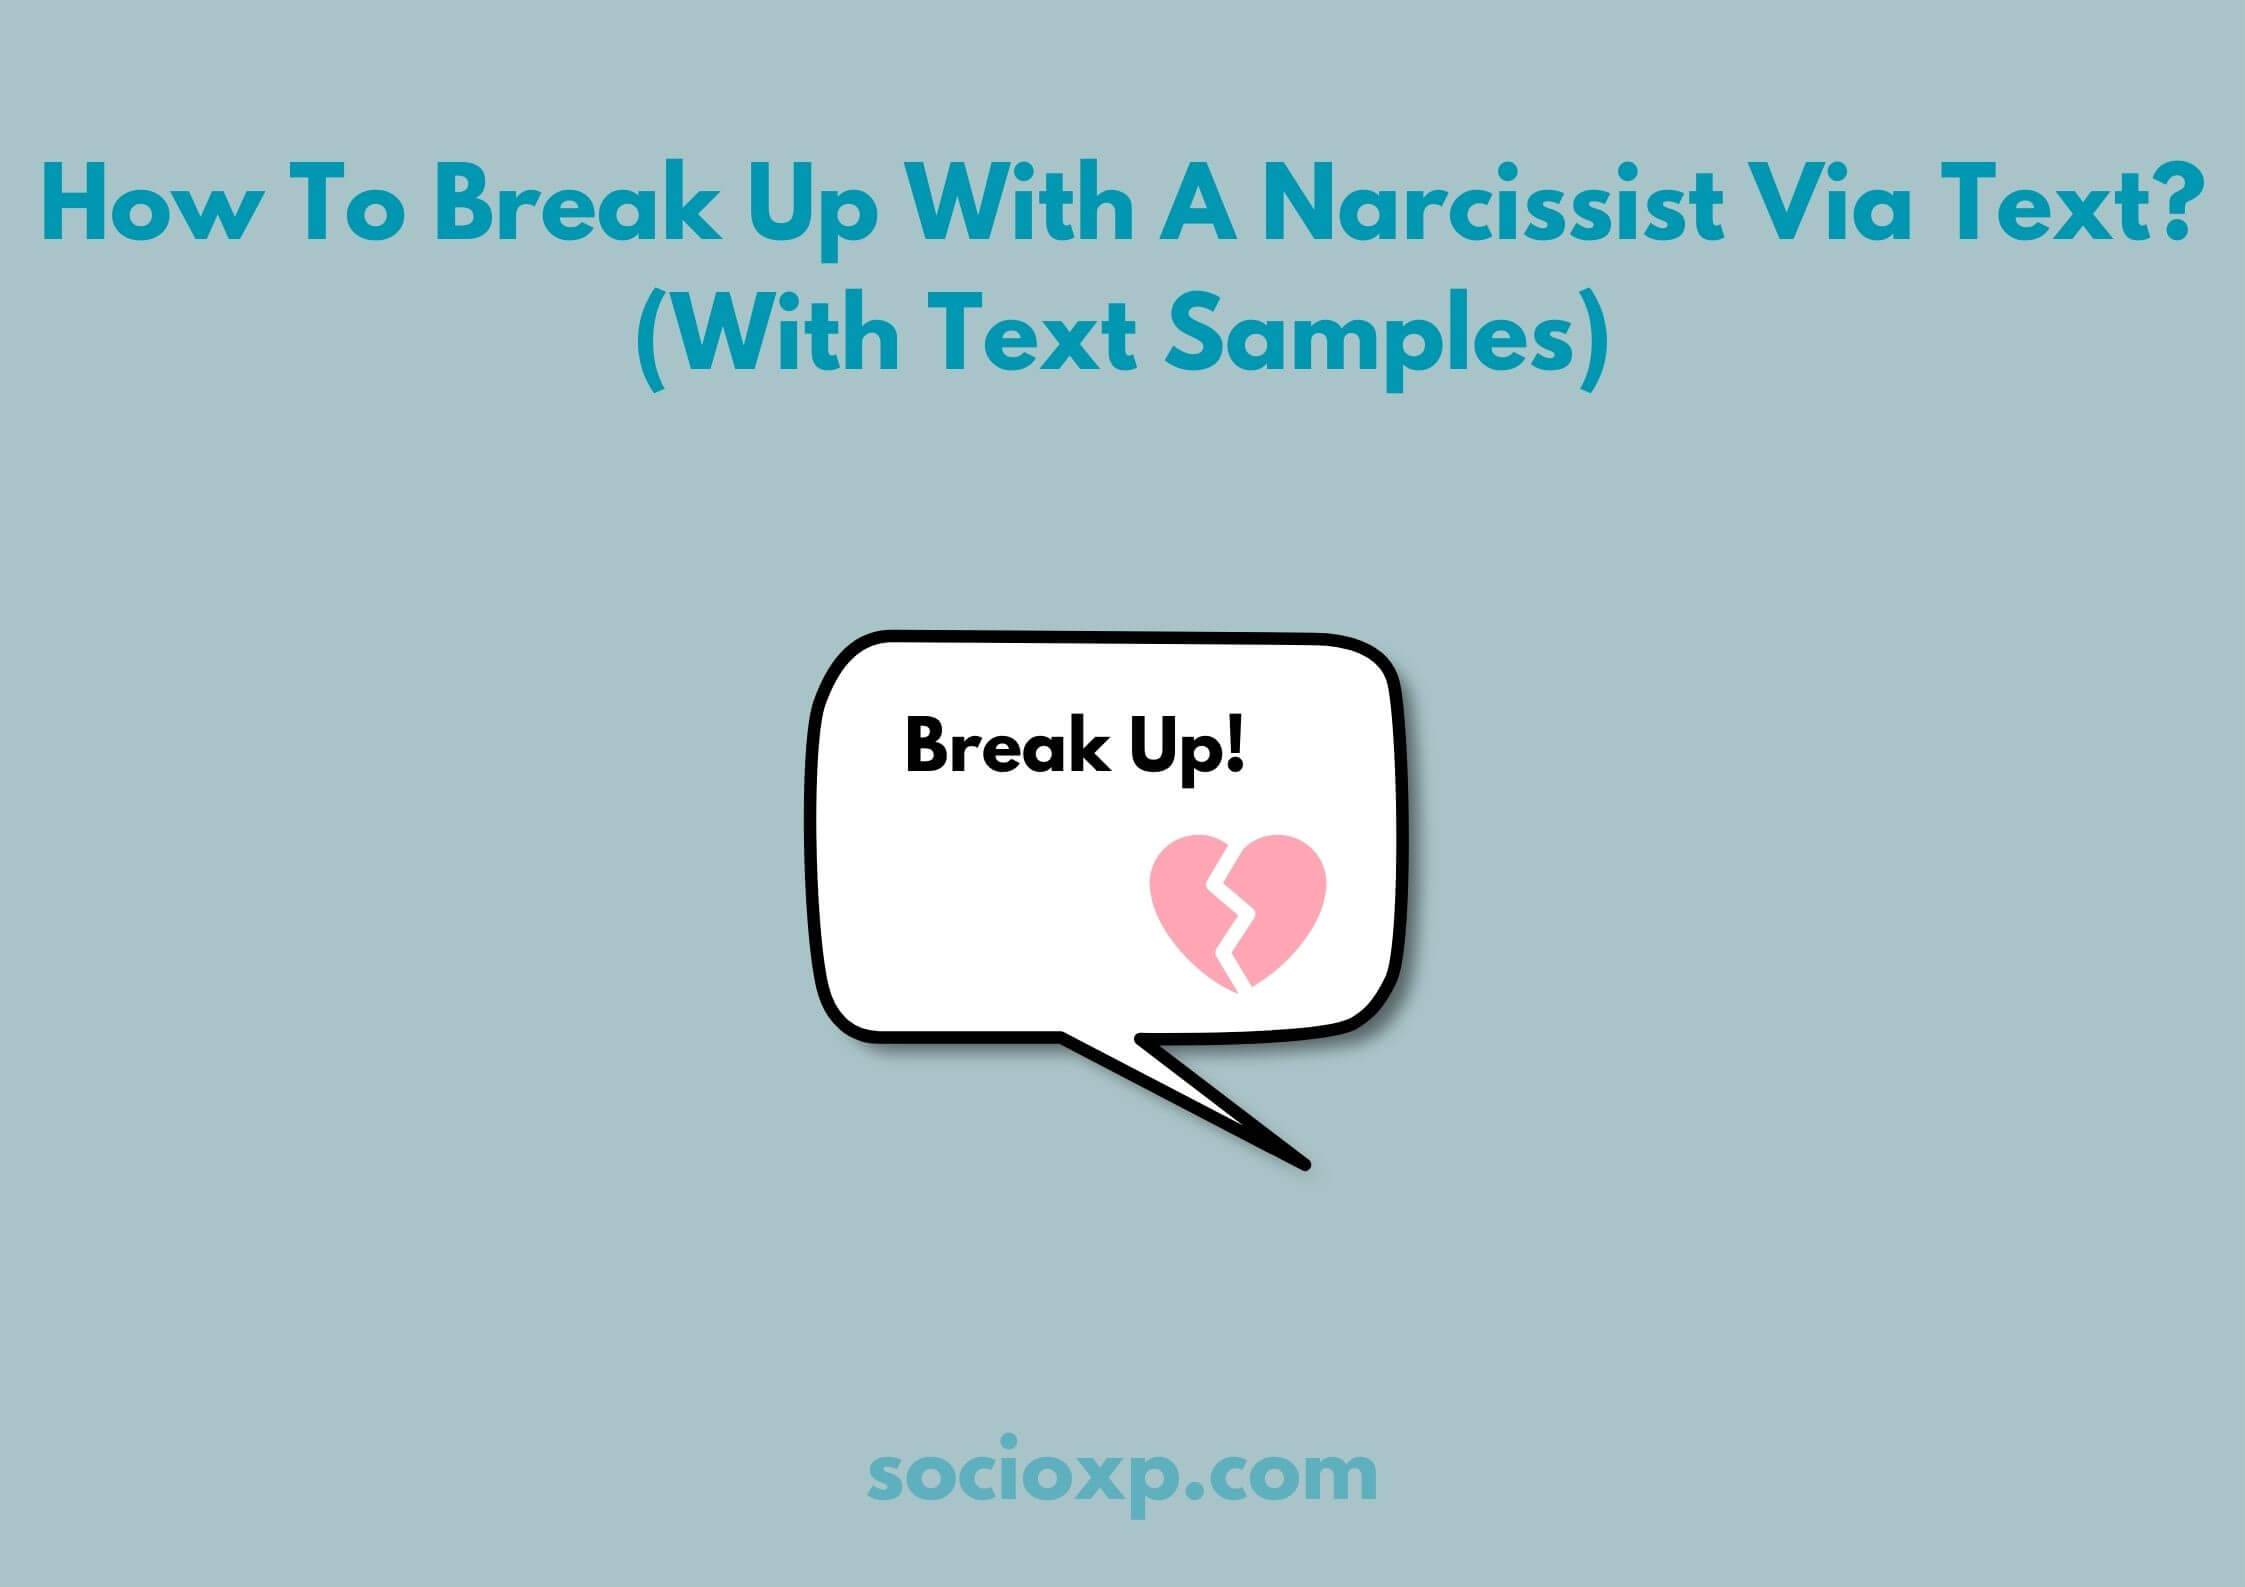 How To Break Up With A Narcissist Via Text? (With Text Samples)